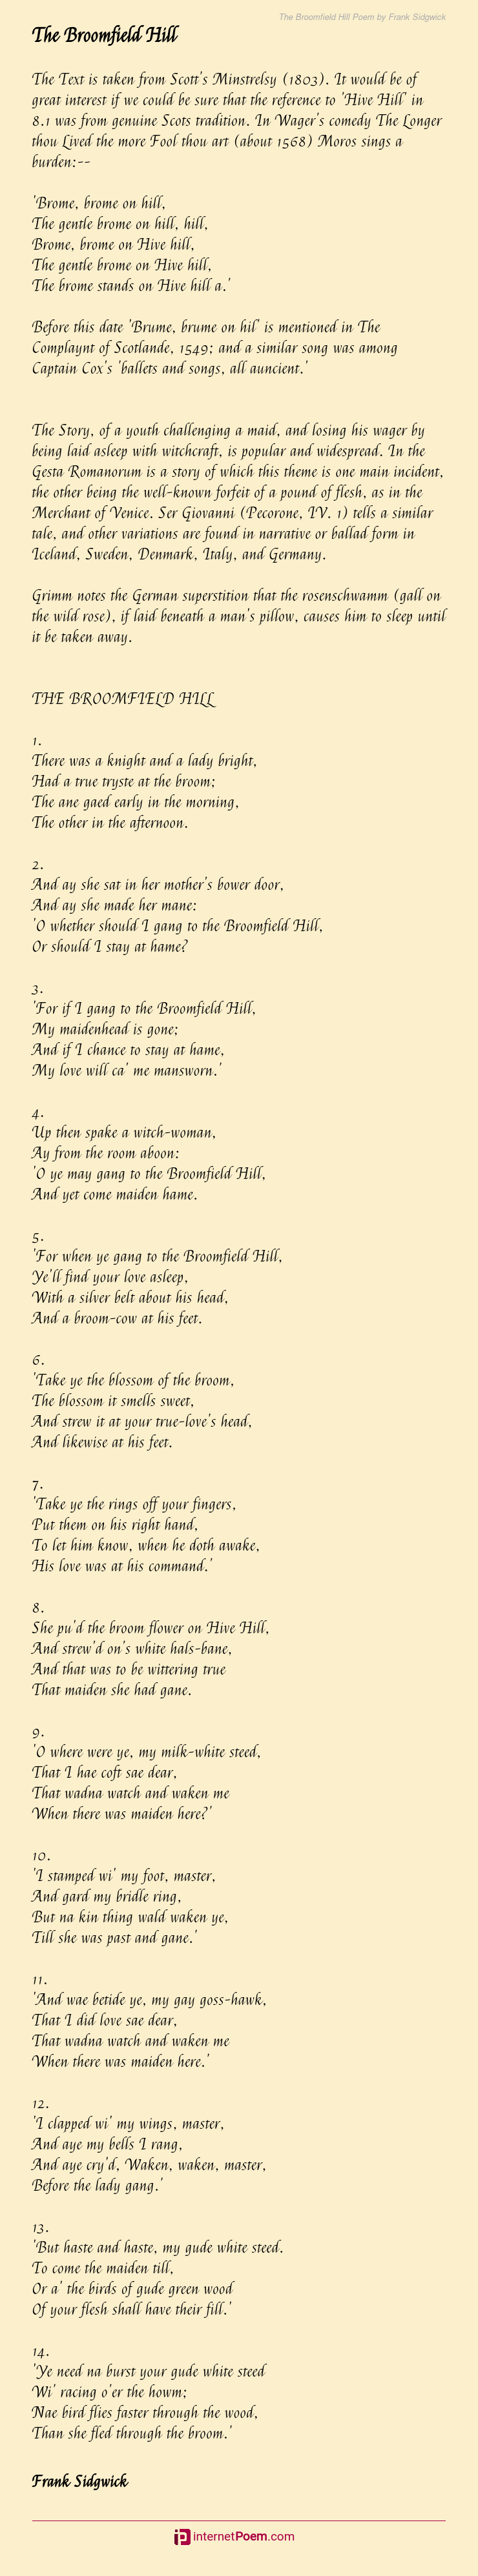 The Broomfield Hill Poem By Frank Sidgwick 2466